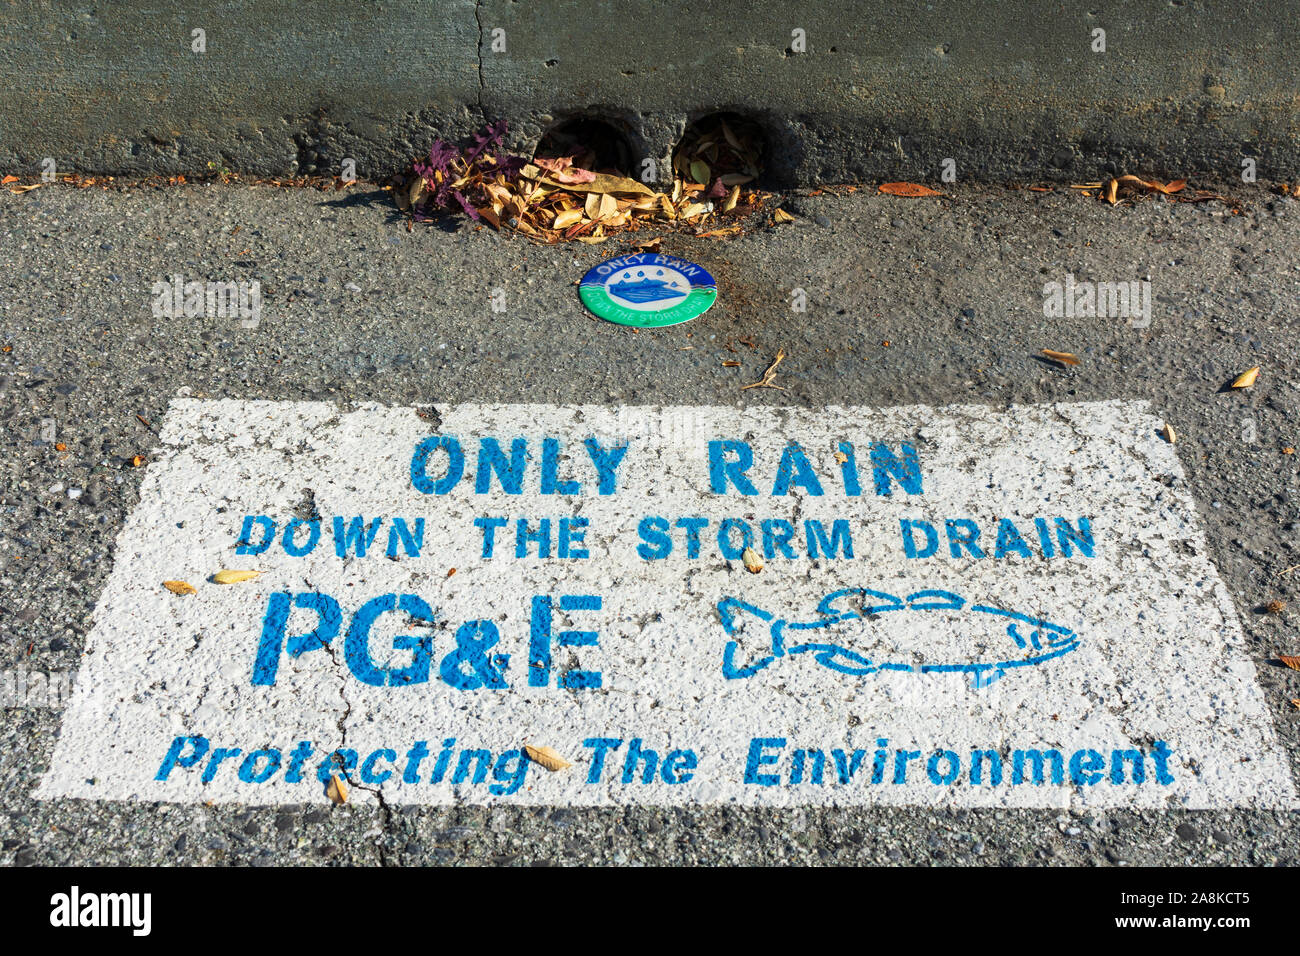 Only rain down to storm drain warning sign PG&E,Pacific Gas and Electric Company, near street drain inlet. Fish Silhouette. Protecting the environment Stock Photo